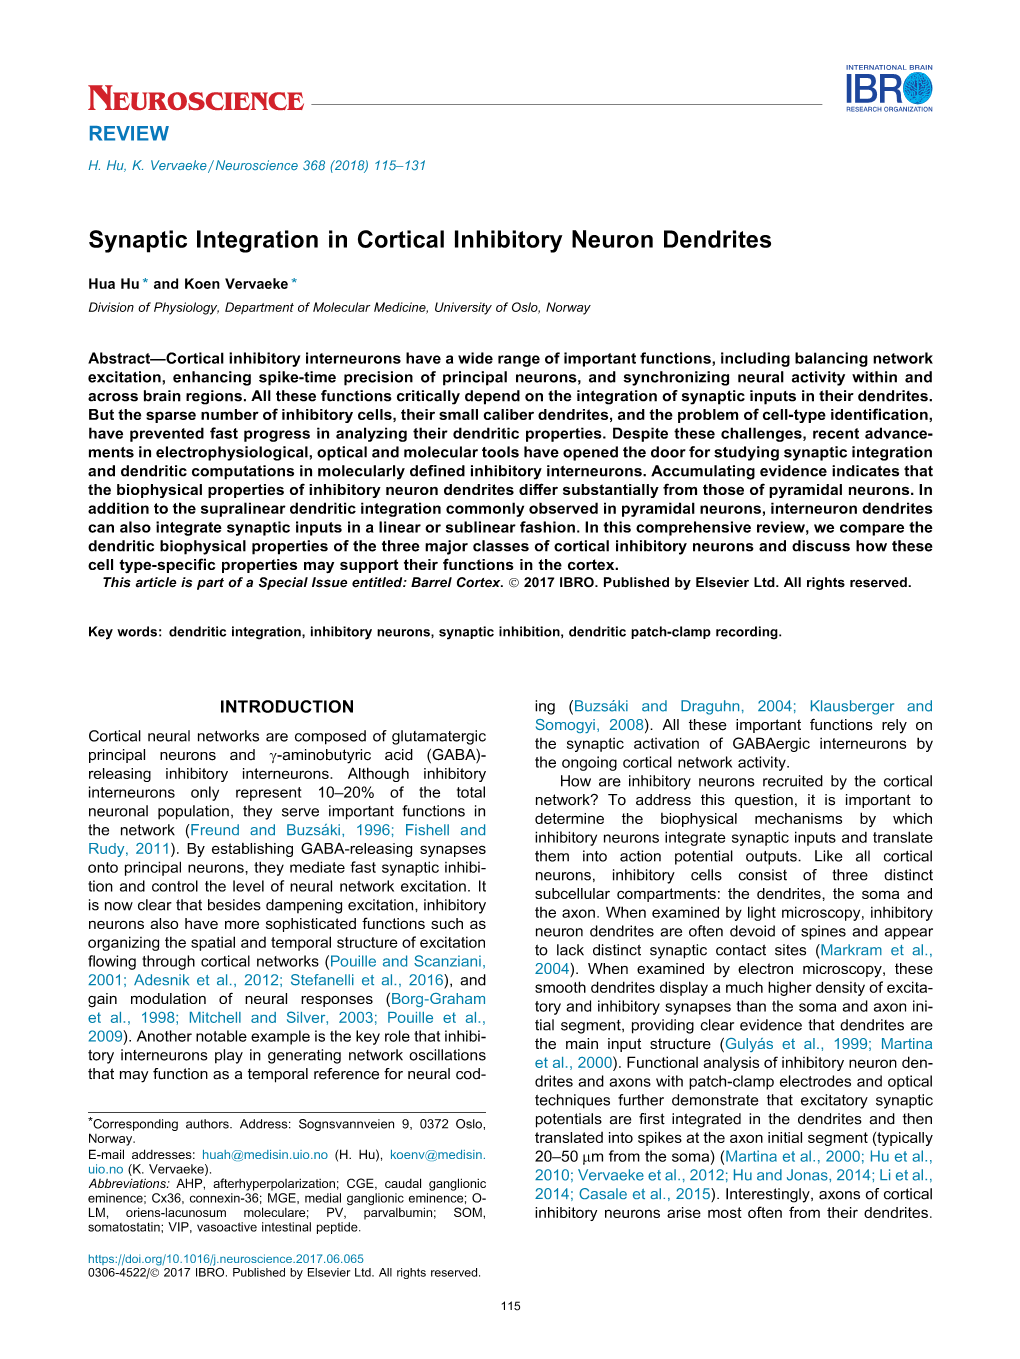 Synaptic Integration in Cortical Inhibitory Neuron Dendrites